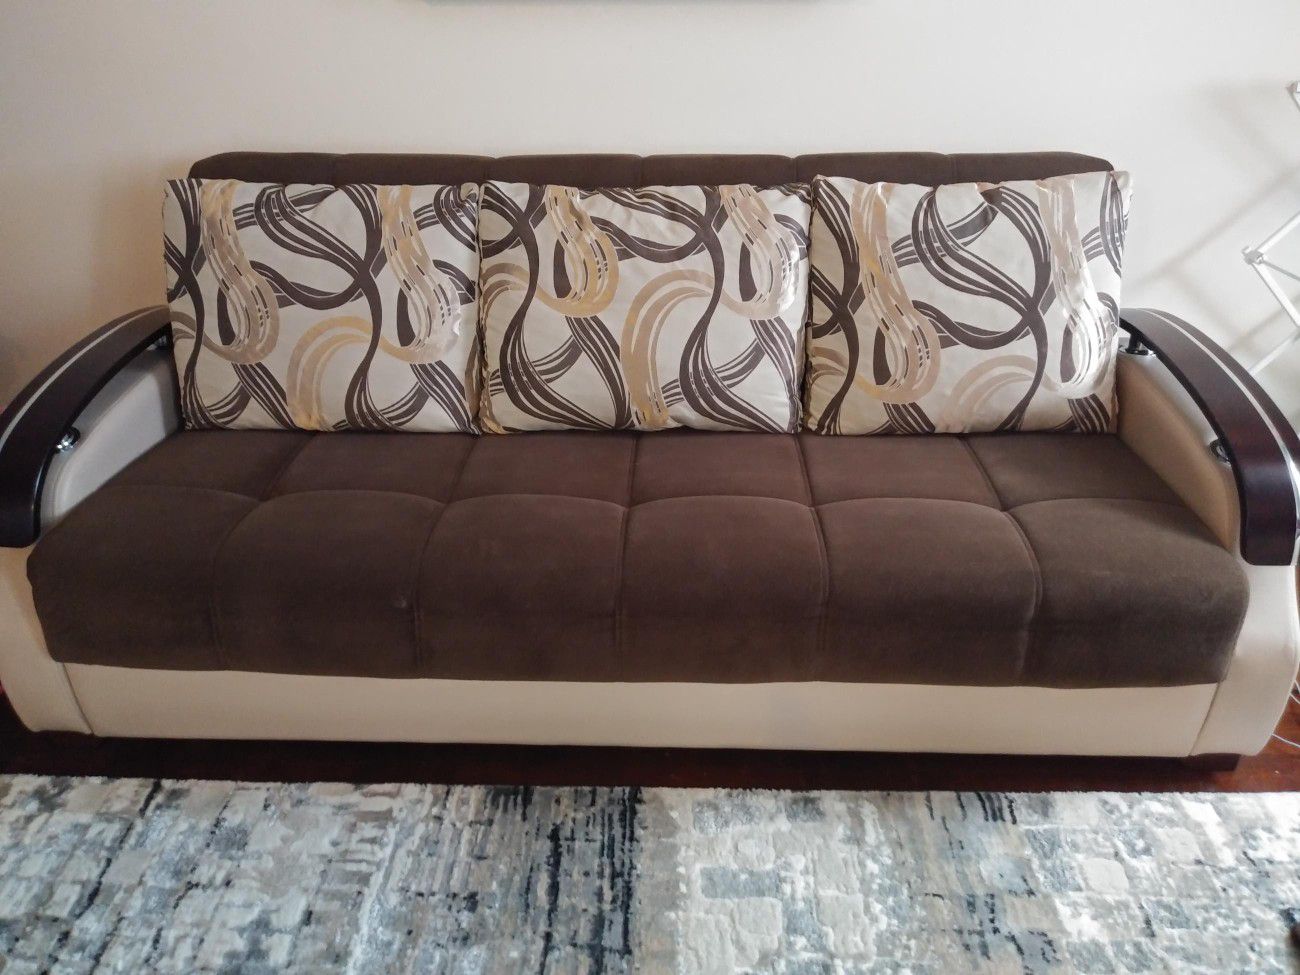 Turkish style couches for sale